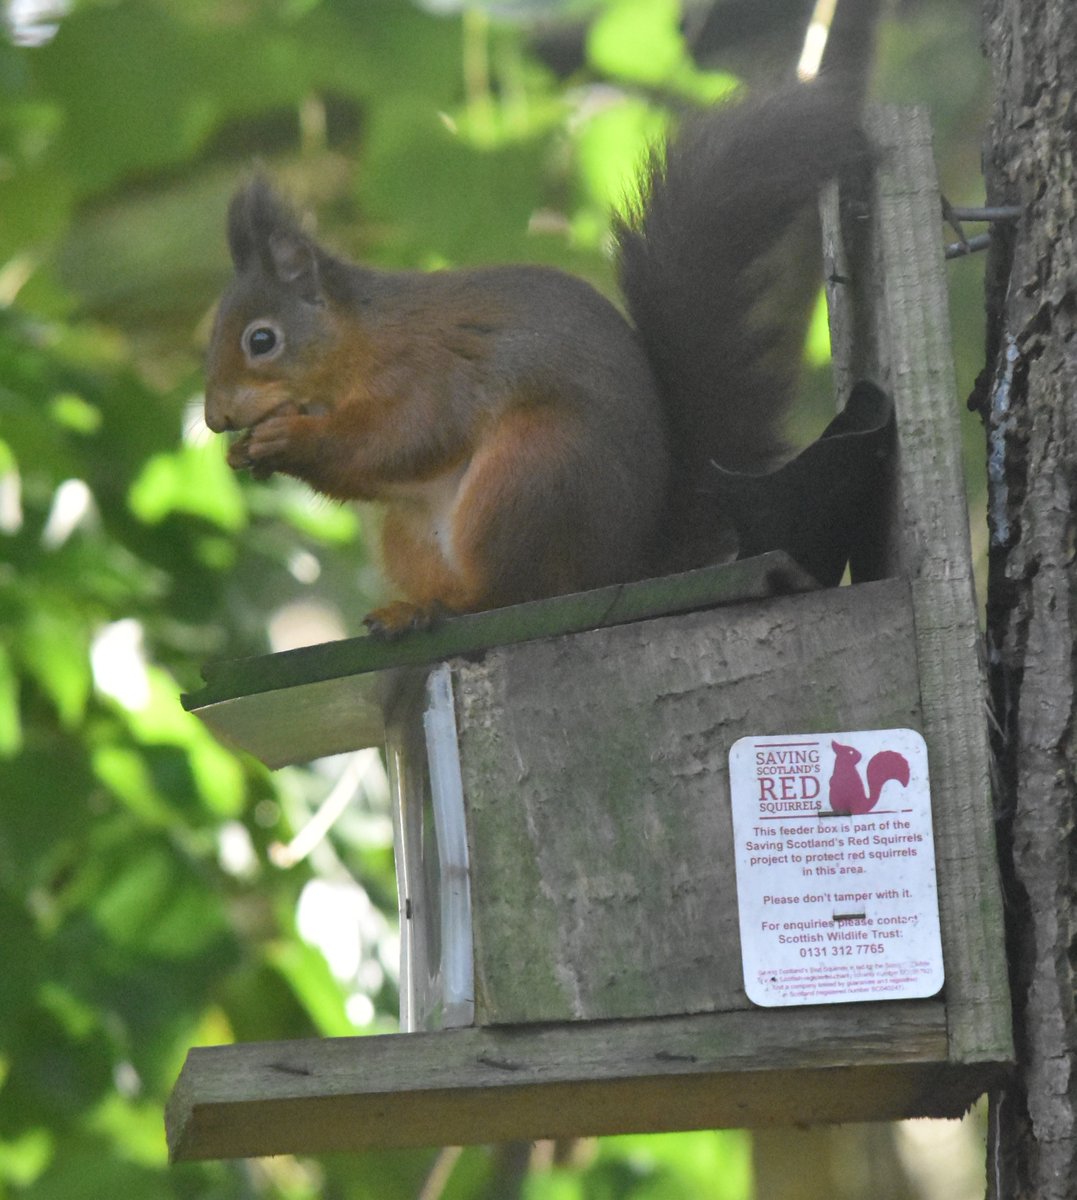 The feeding box doing exactly what it should be doing. #saveourreds #Redsquirrels